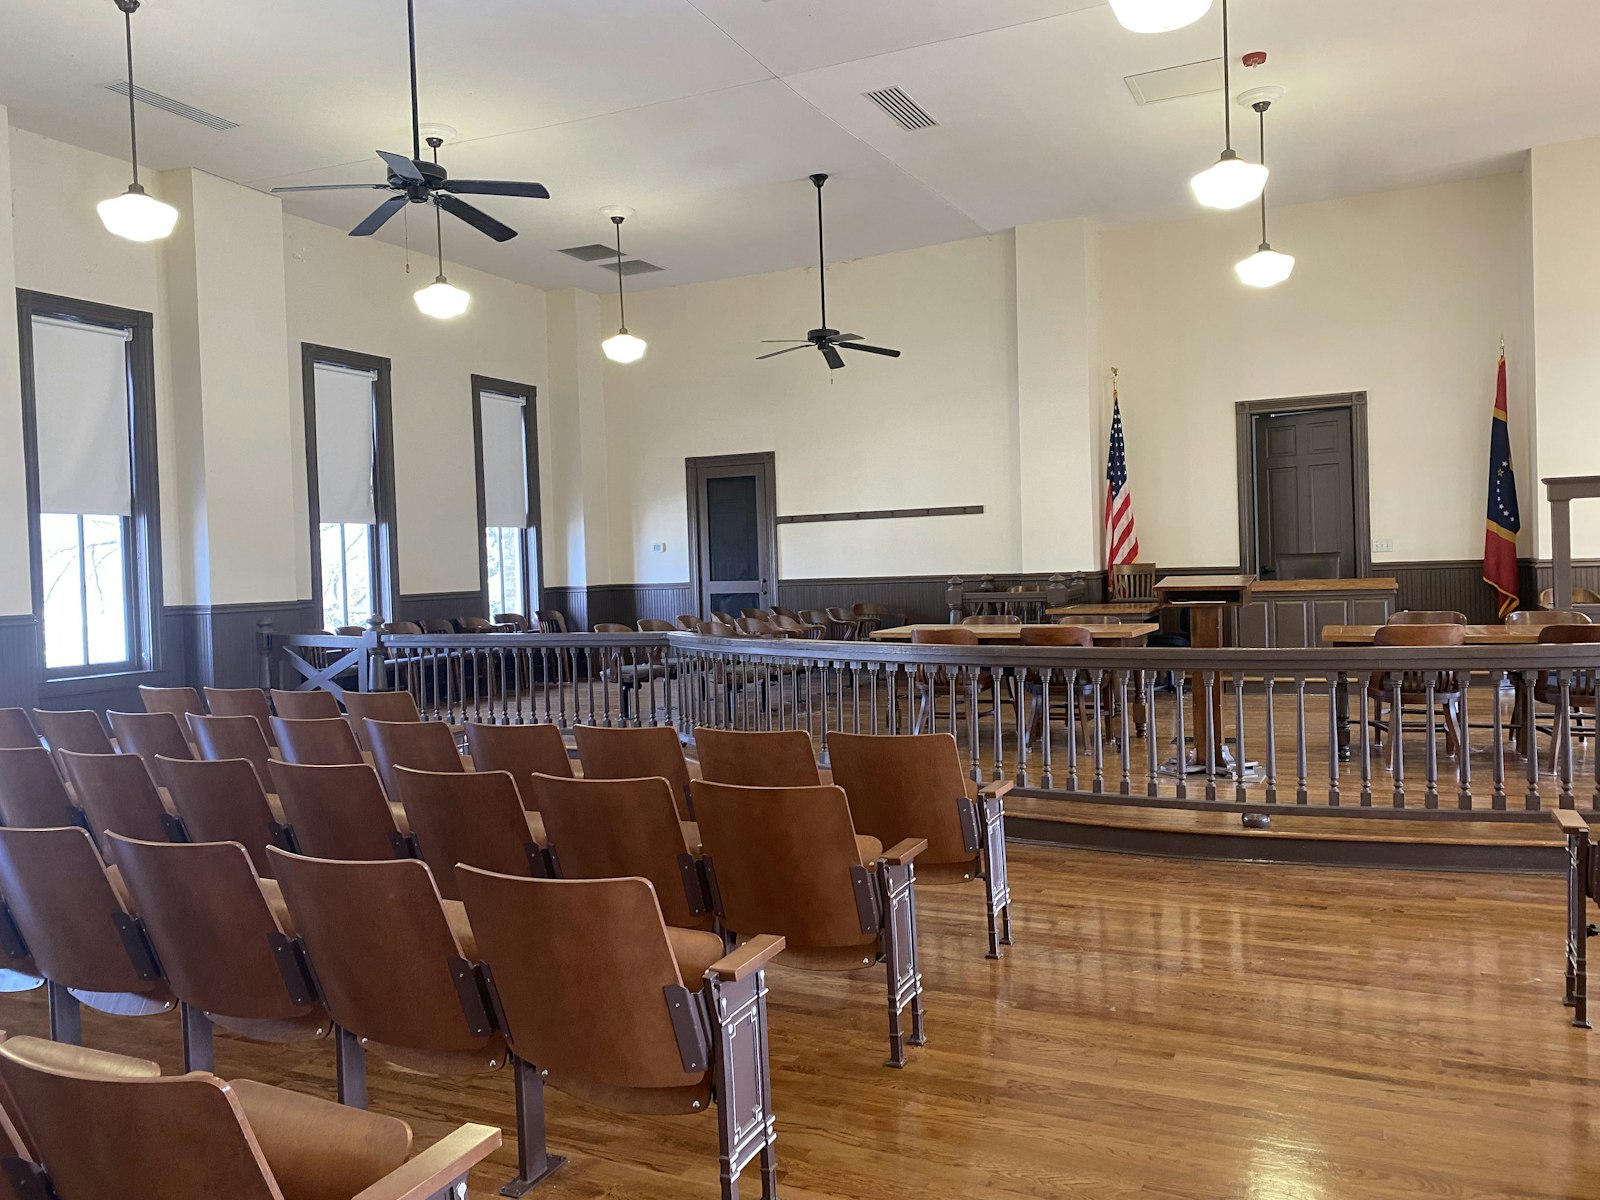 Interior of courthouse, with wooden chairs, bolted to the ground and facing an elevated platform